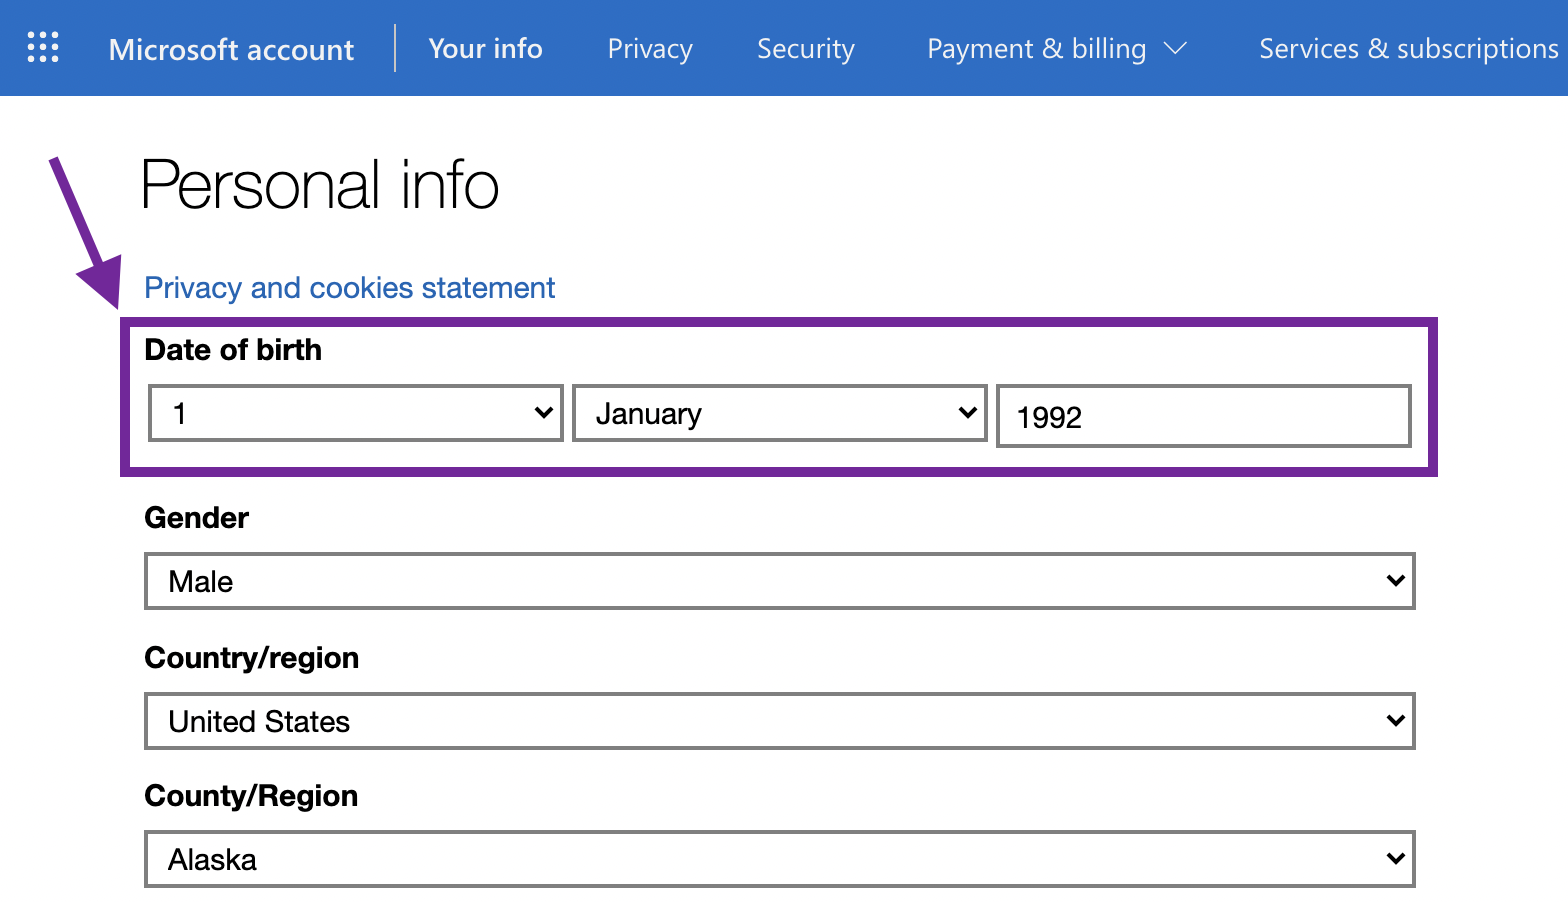 Changing the birthday in the 'Personal info' window